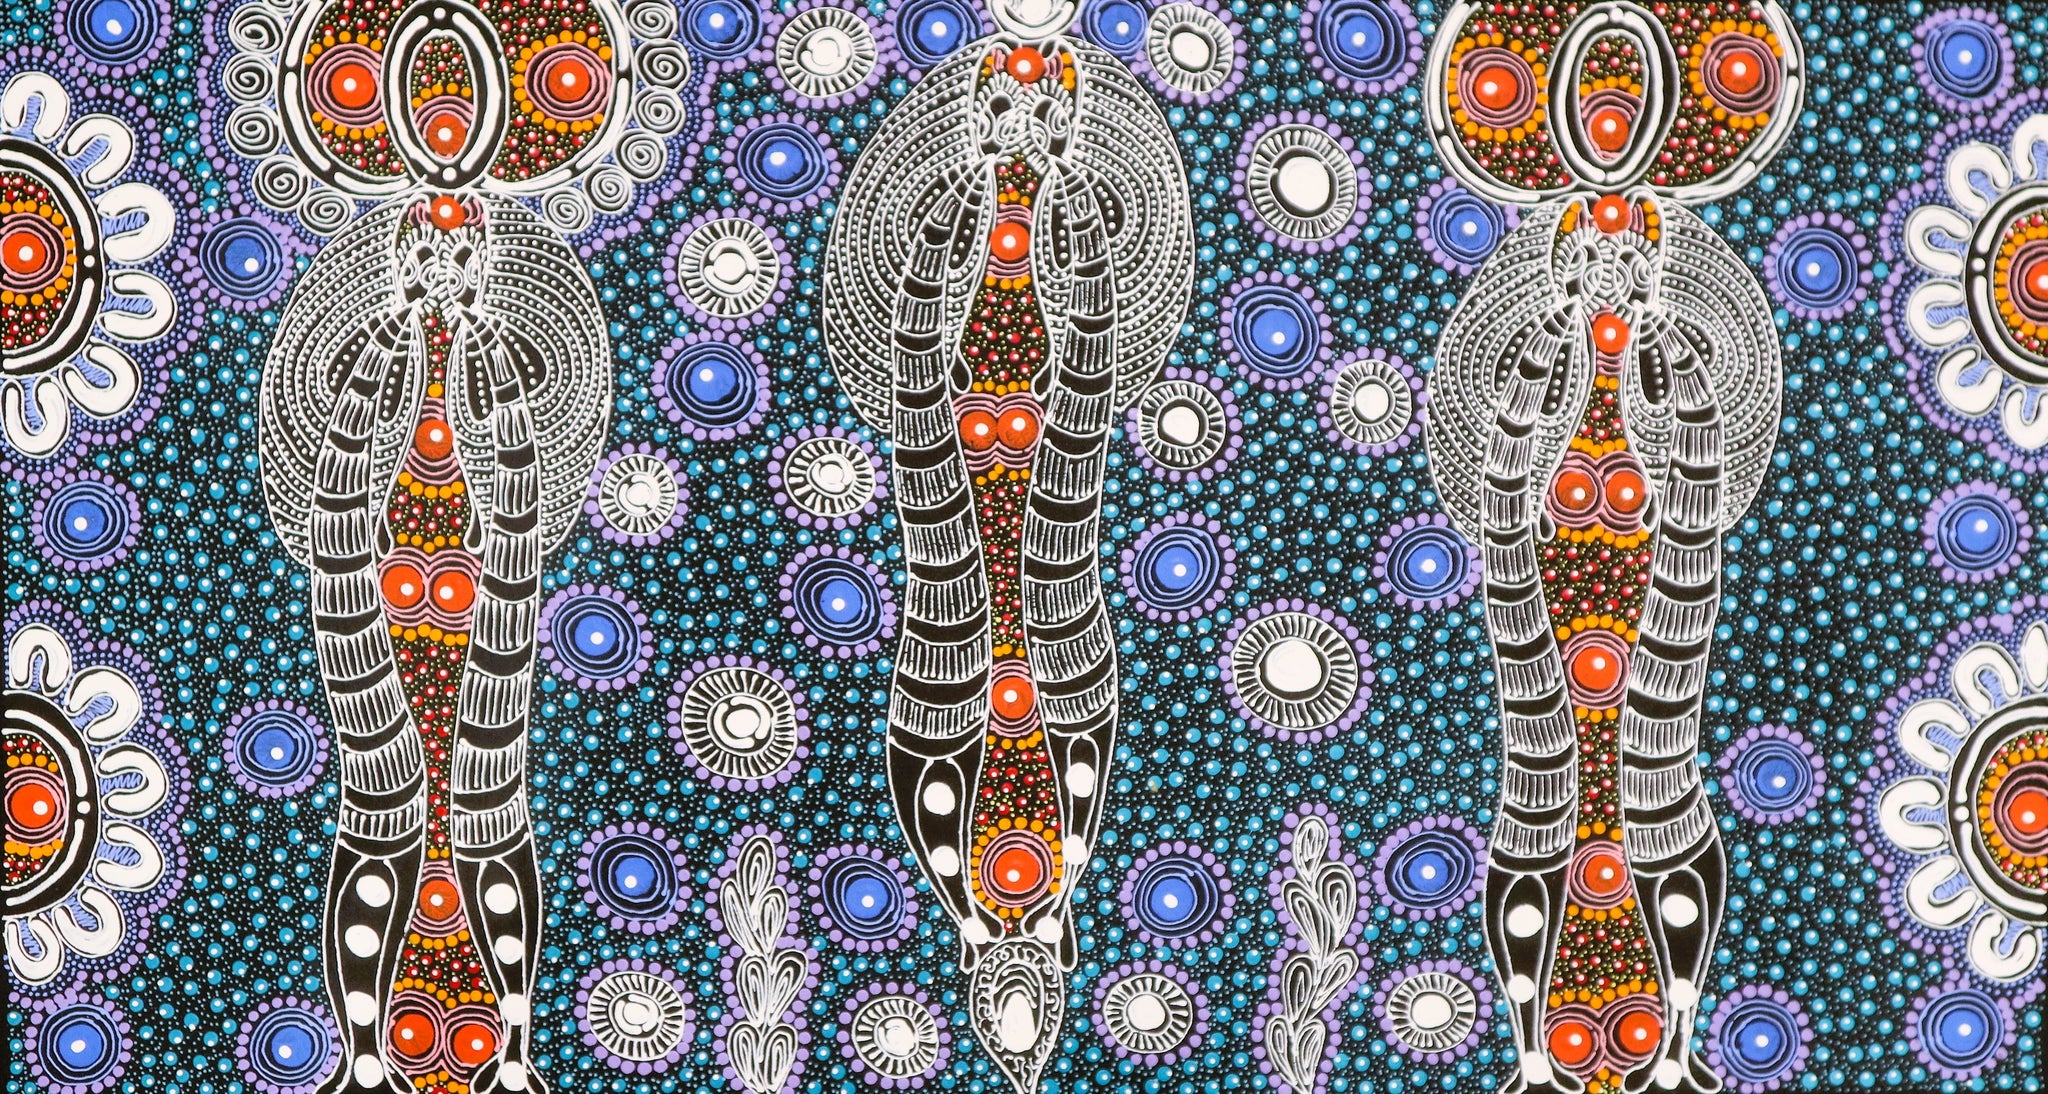 "Dreamtime Sisters" by Colleen Wallace